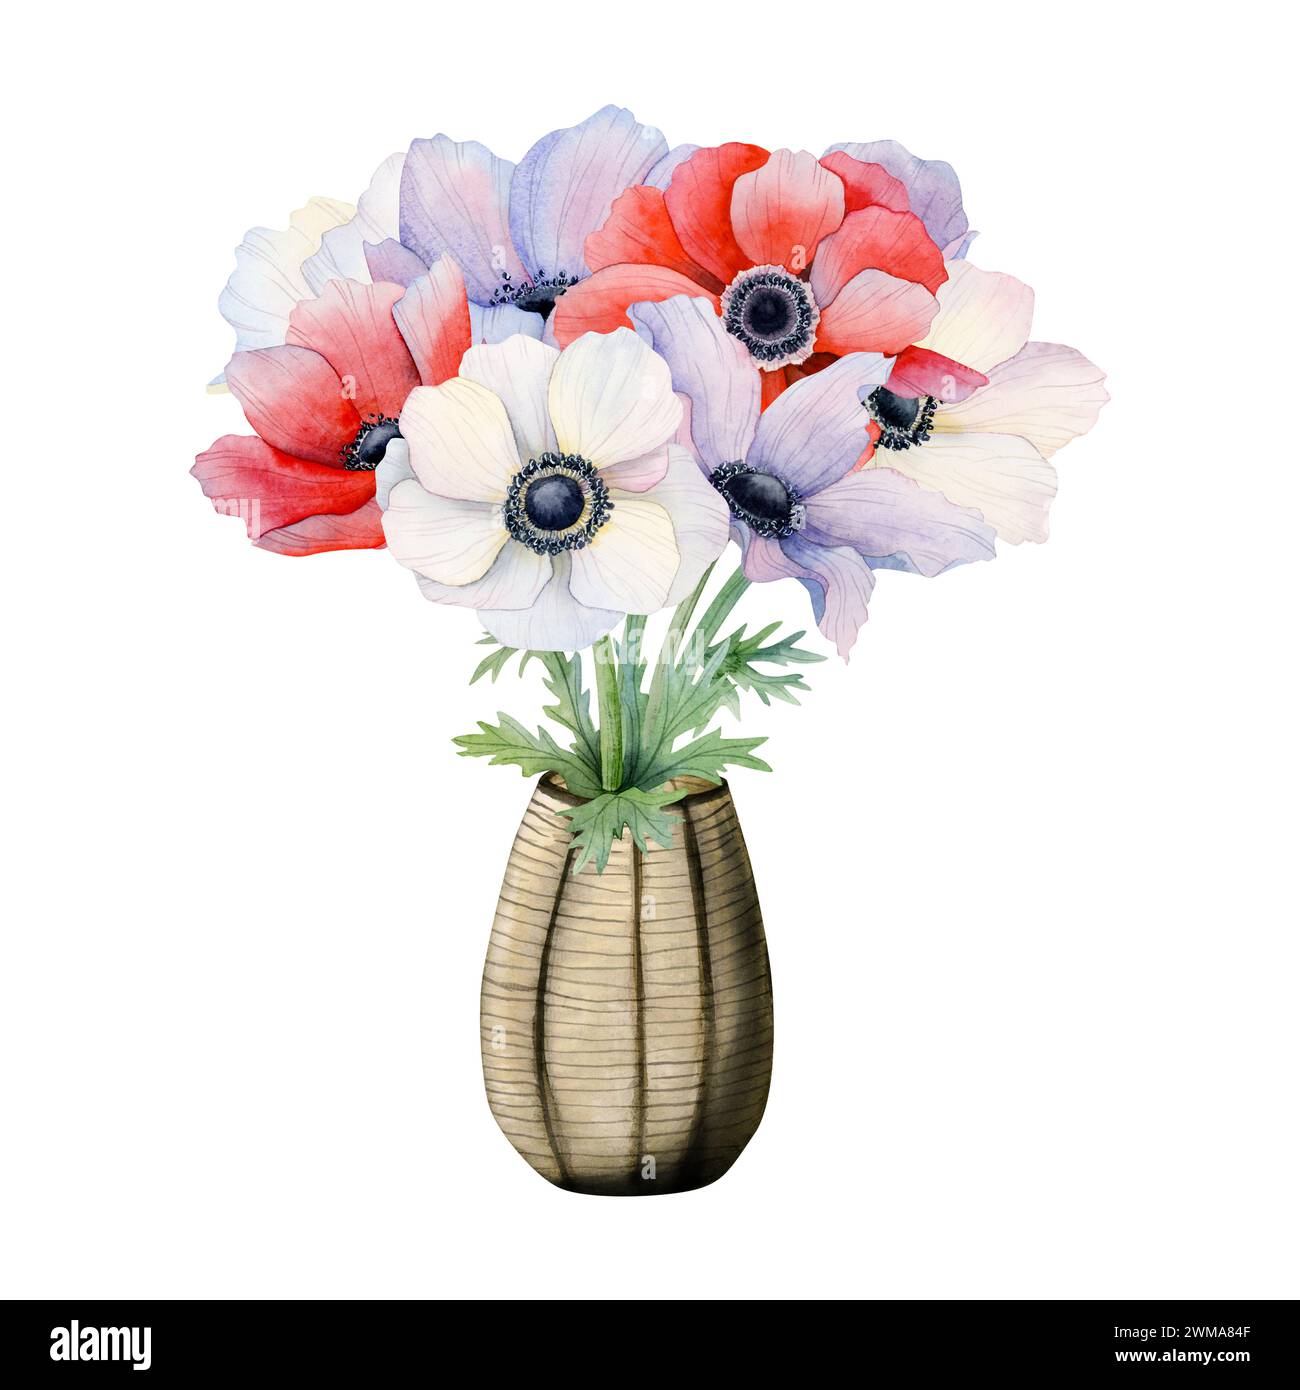 Elegant anemones bouquet of purple, white and red field flowers in brown vase watercolor illustration for spring Stock Photo